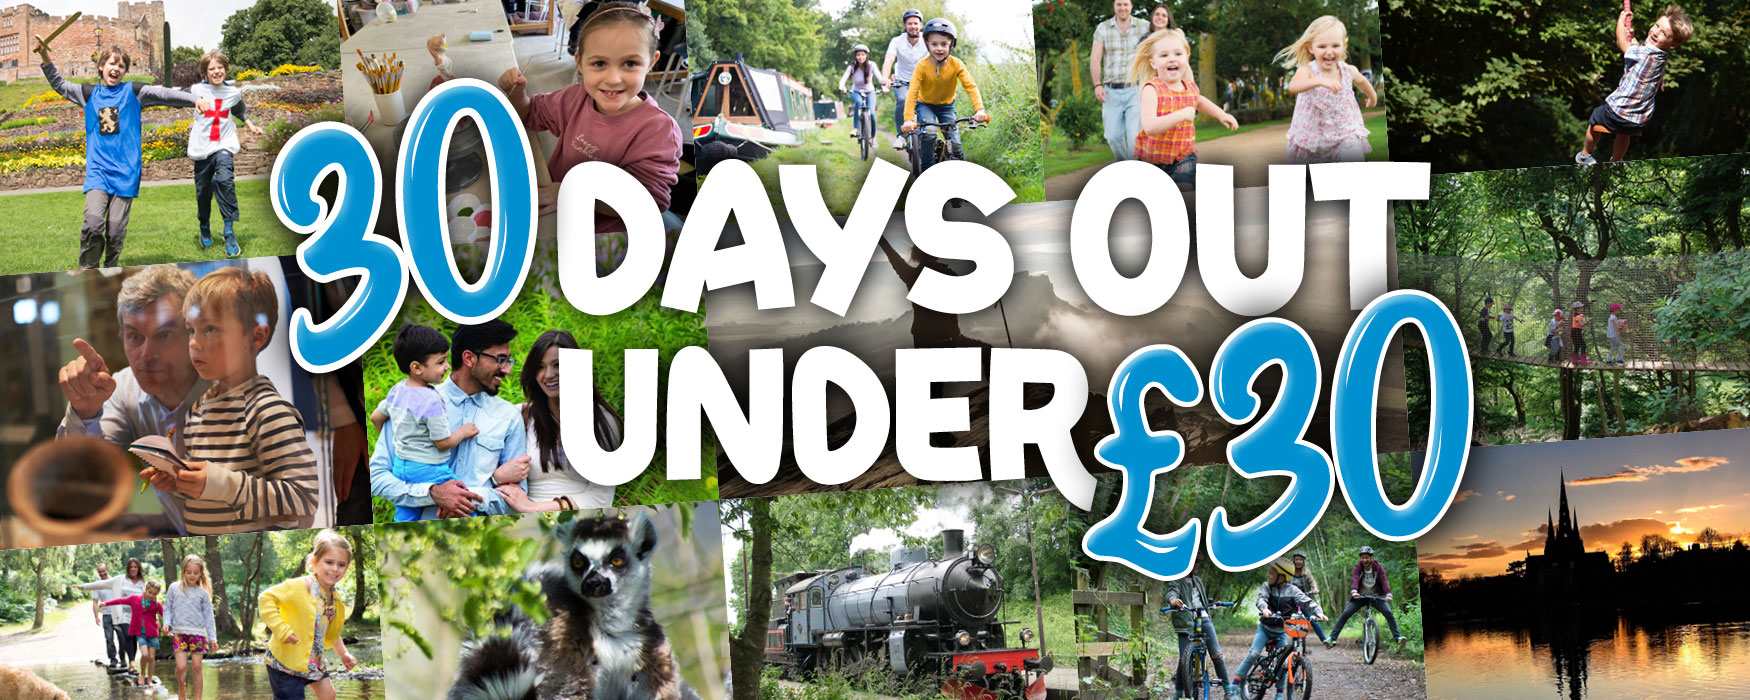 30 Family Days Out in Staffordshire for Under £30 - Enjoy Staffordshire